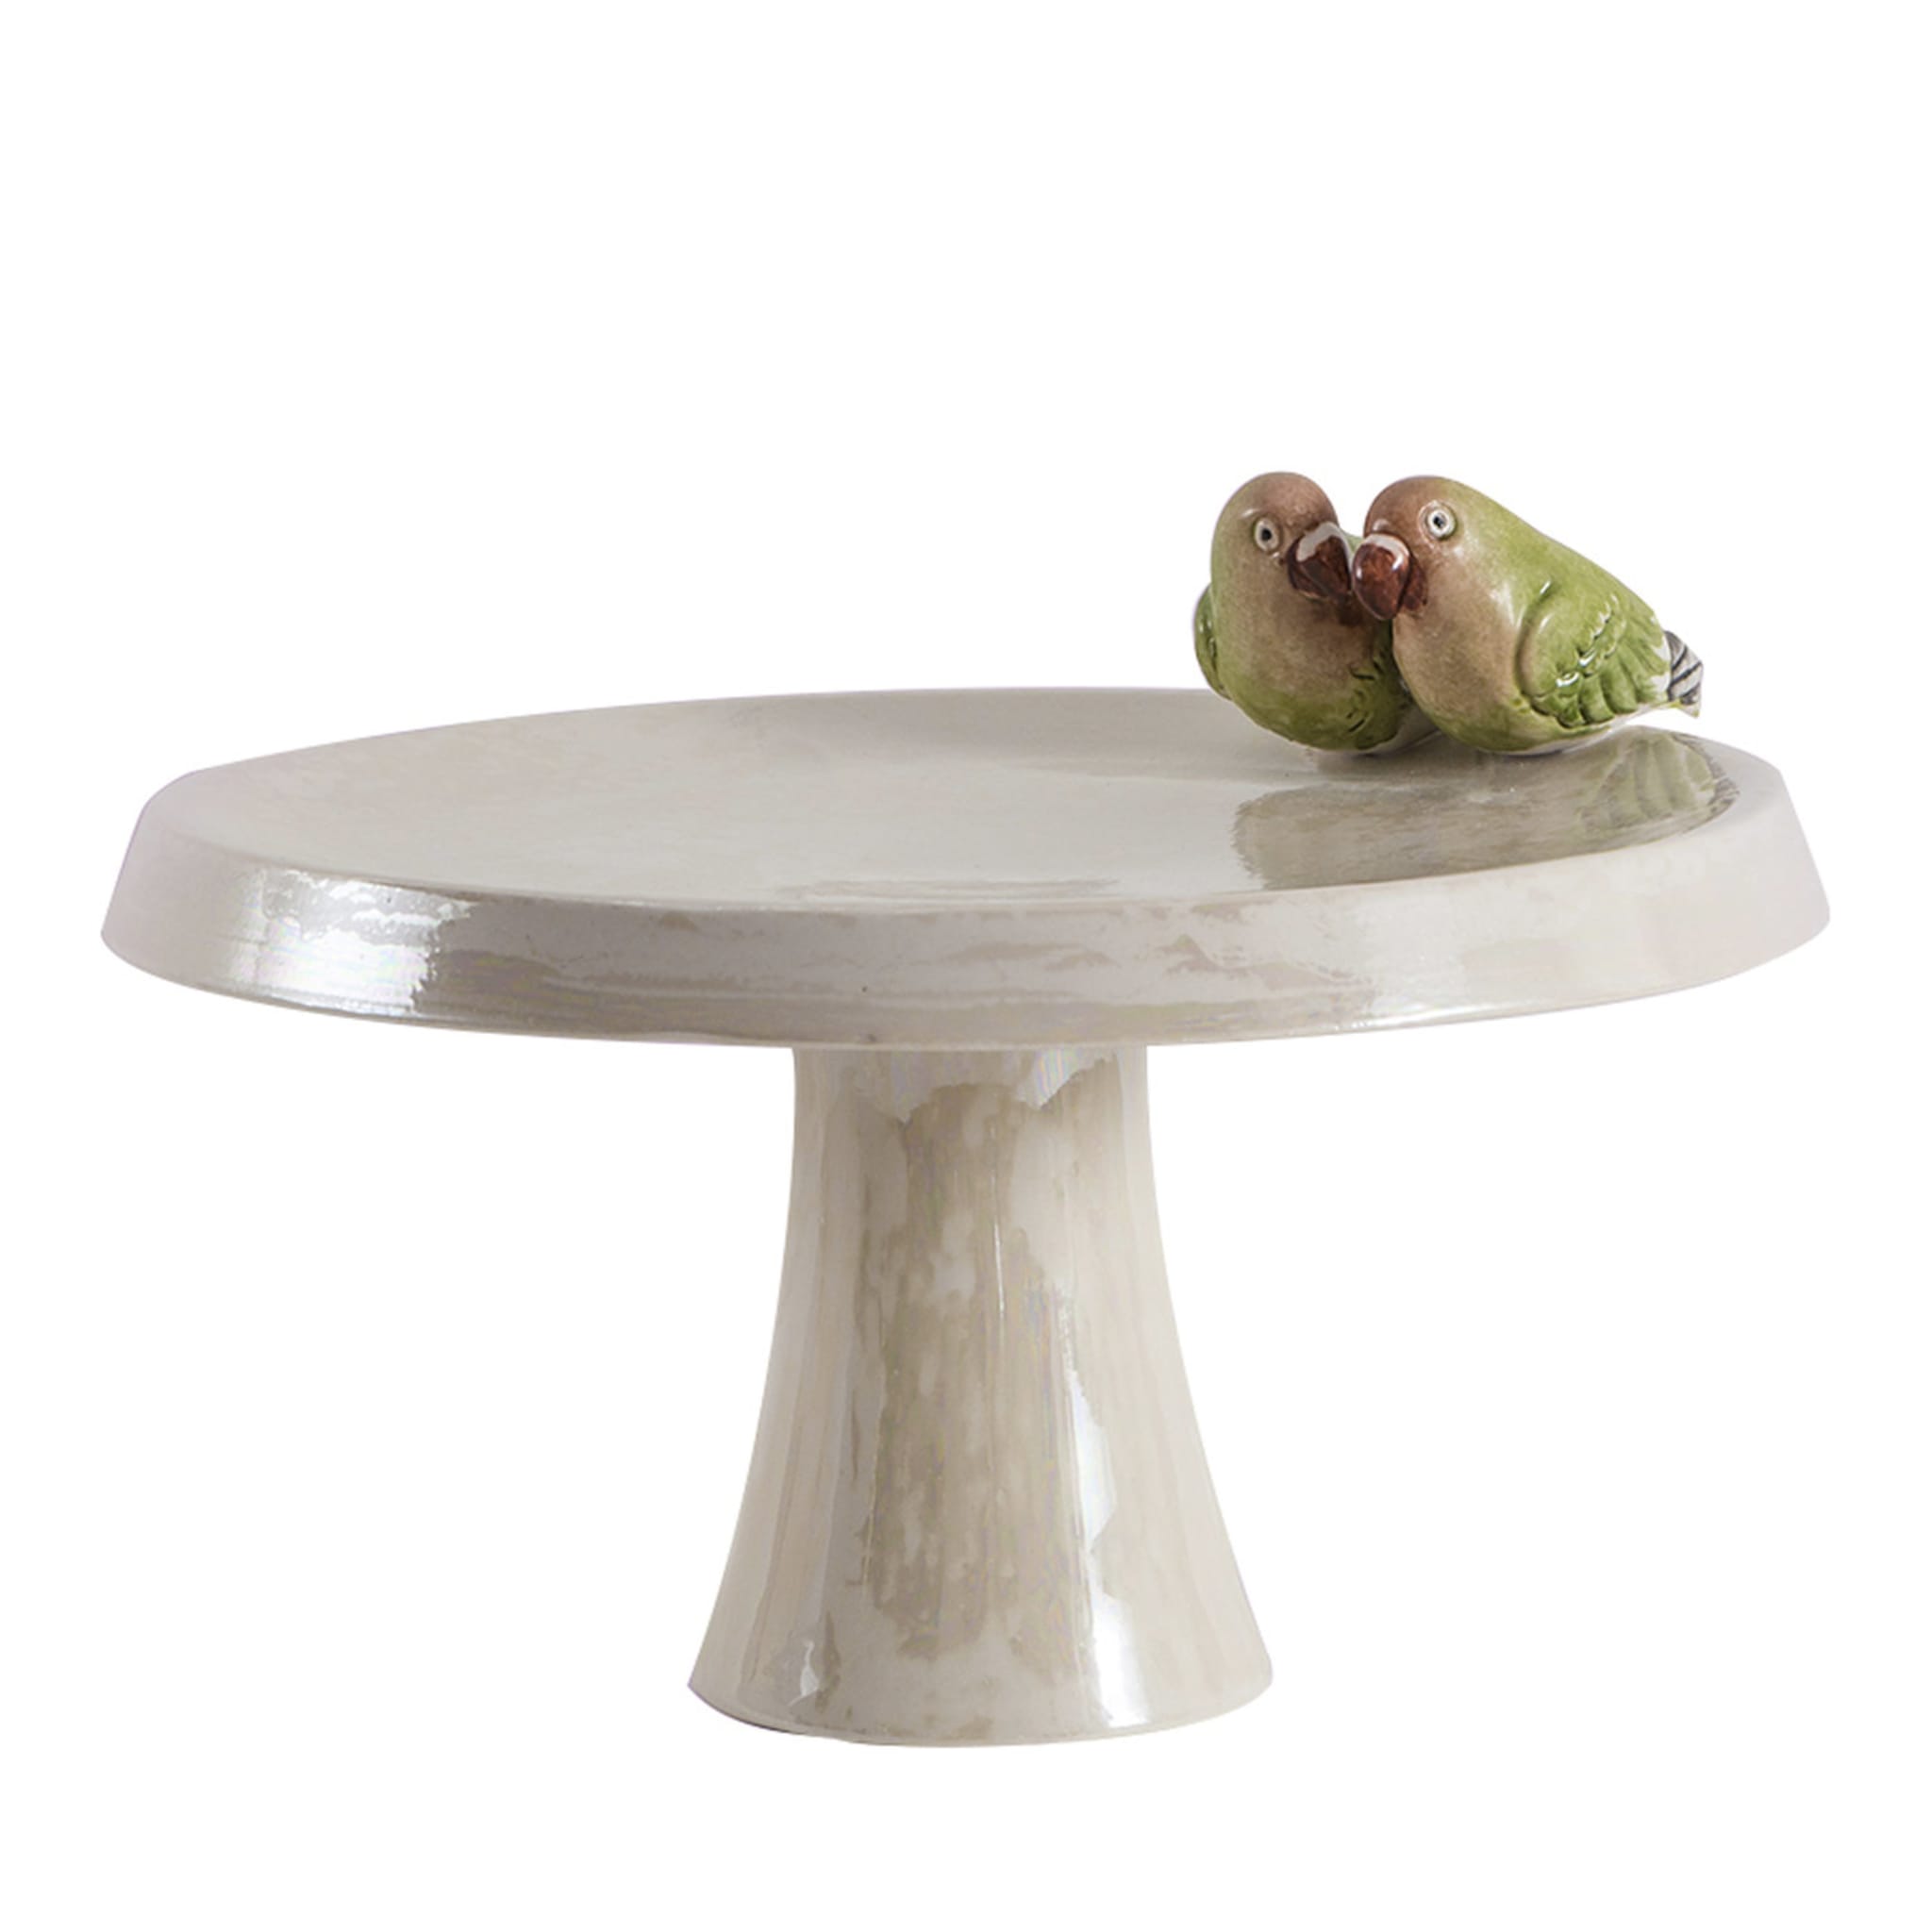 Esotica Collection Inseparabili Porcelain Cake Stand - Main view